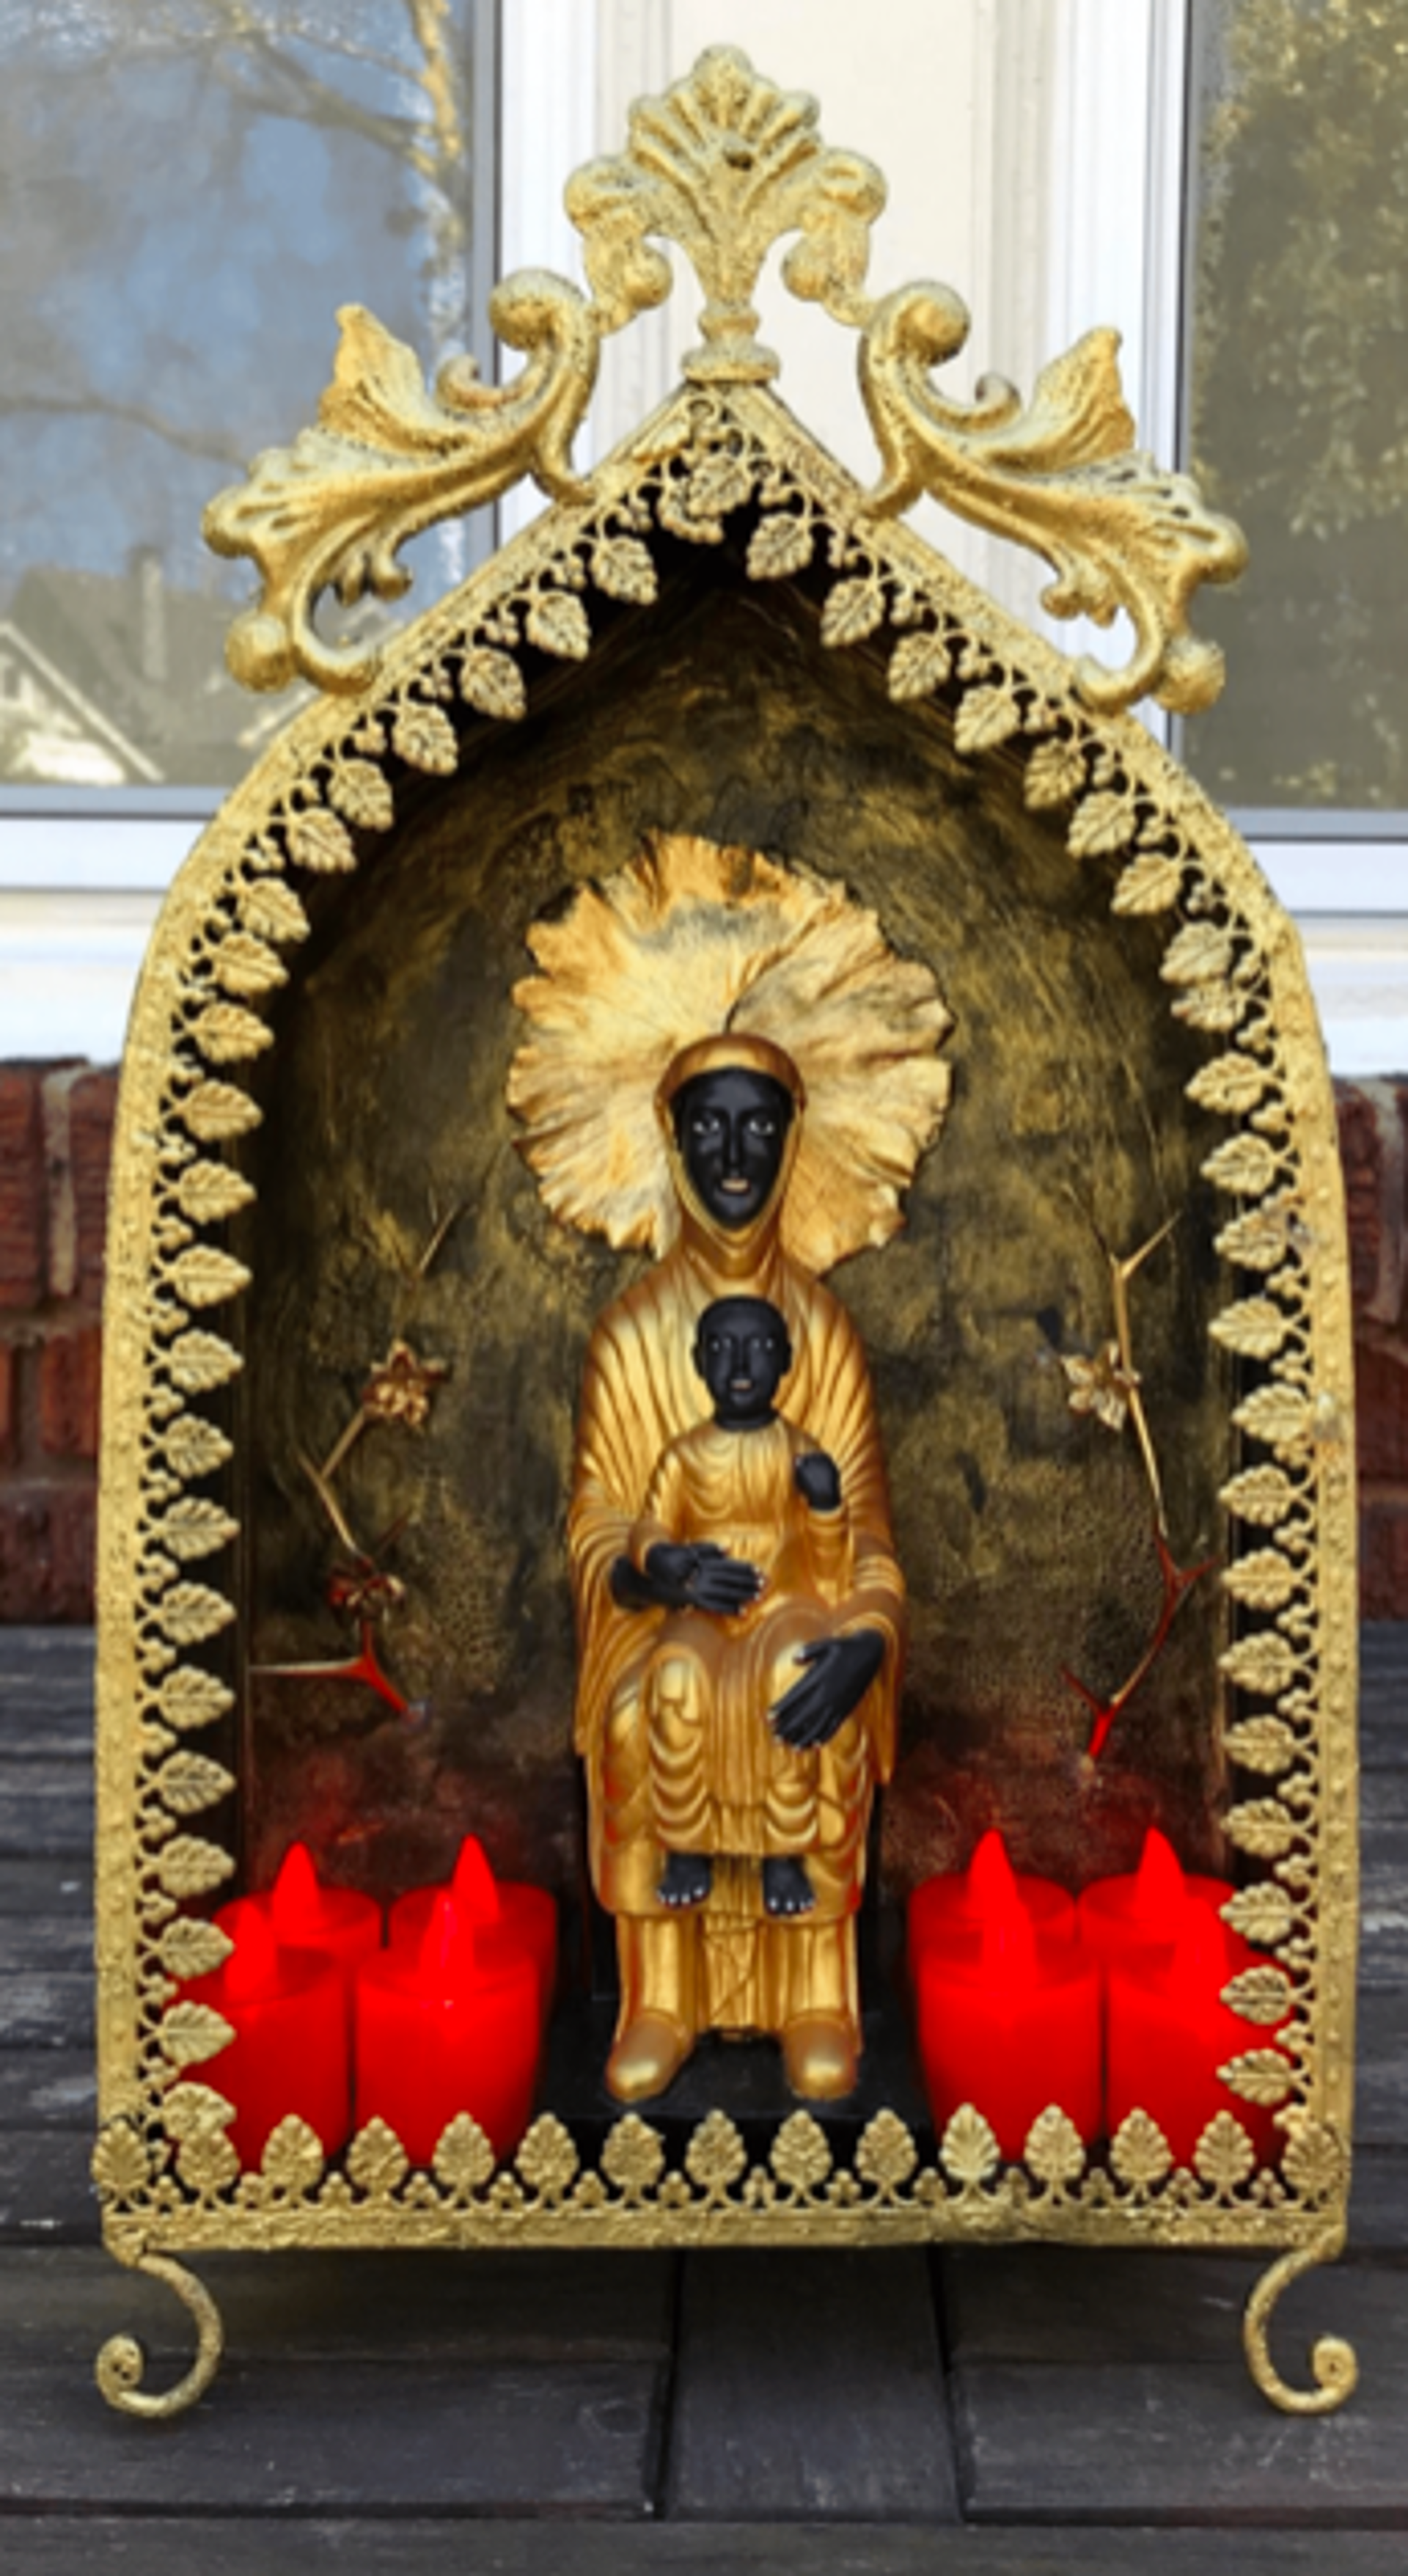 Black Madonna of Cleremont-Ferrand  by Lori Haas